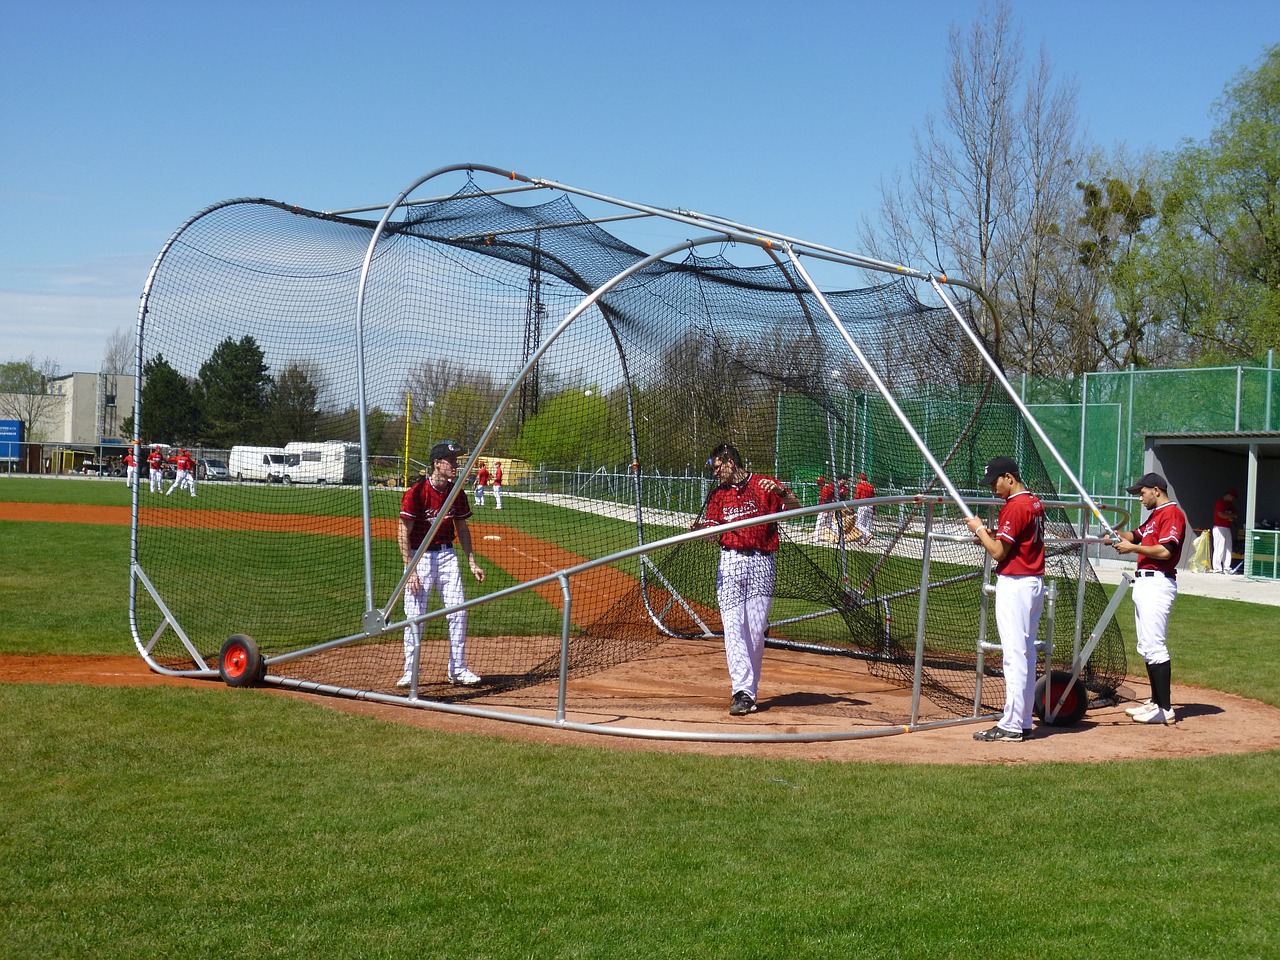 baseball players in a batting cage